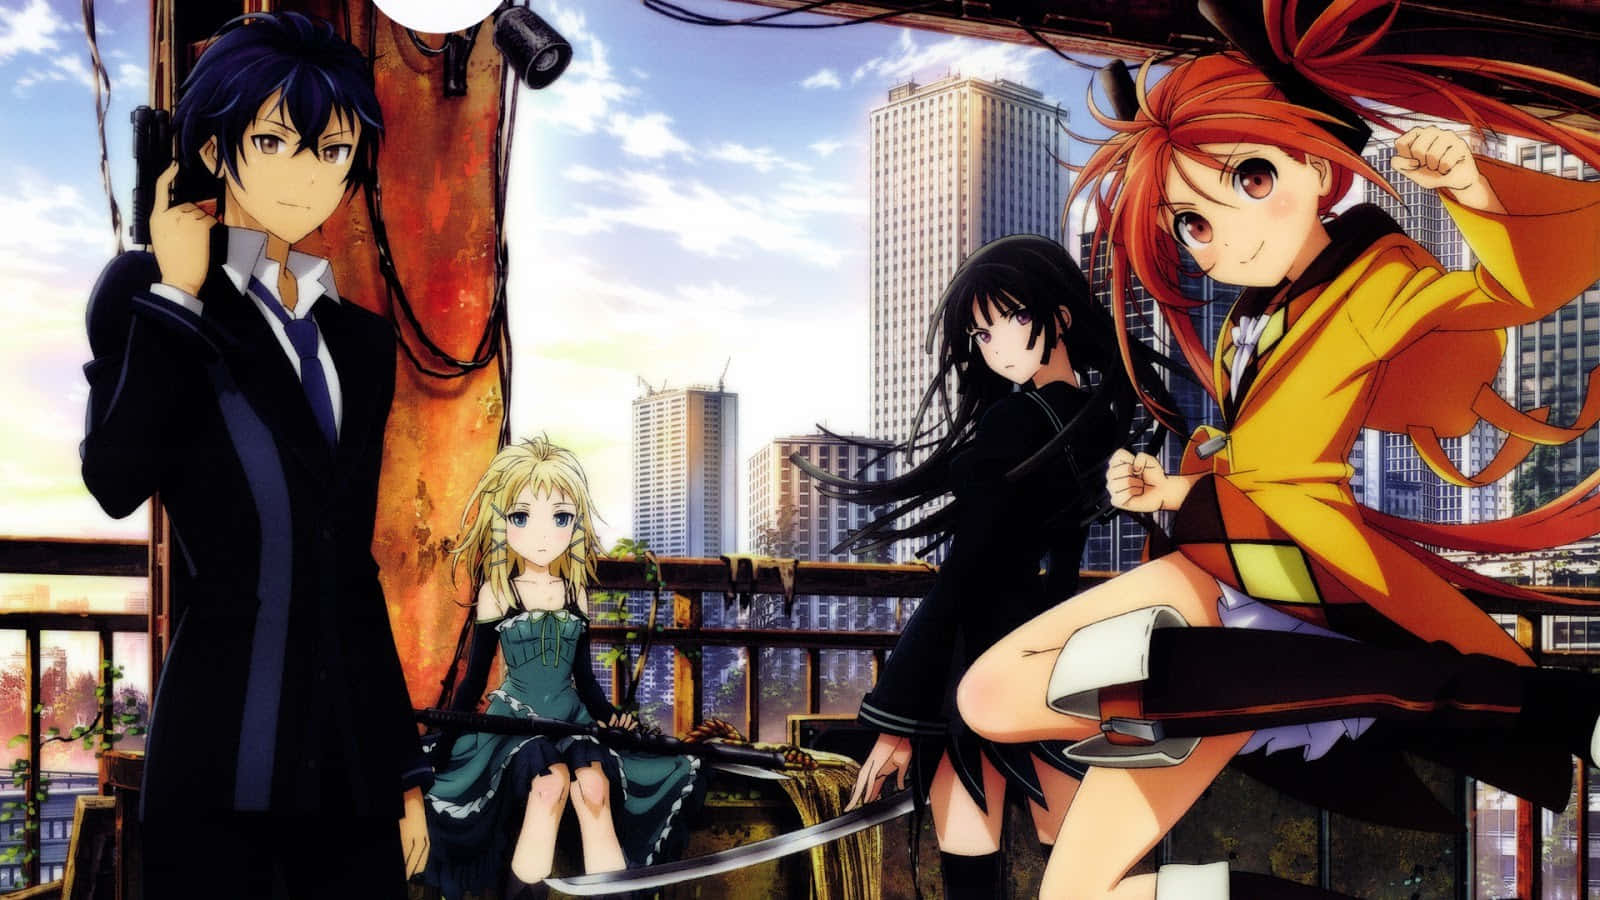 Step into the world of Black Bullet and stand strong with her allies